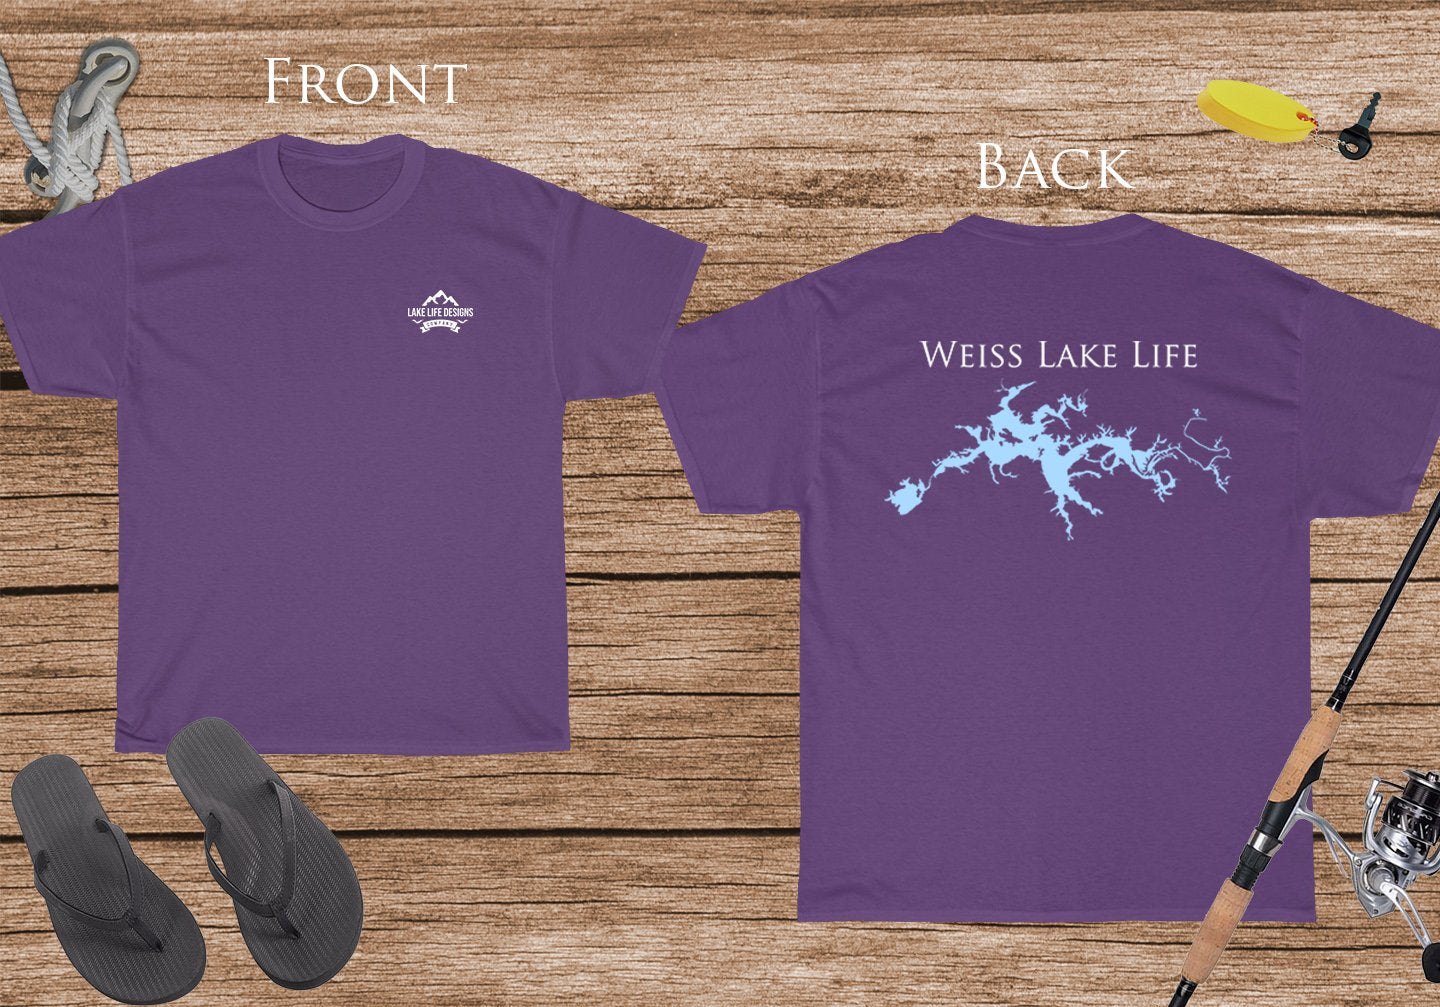 Weiss Lake Life - Cotton Short Sleeved - FRONT & BACK PRINTED - Short Sleeved Cotton Tee - Georgia Lake